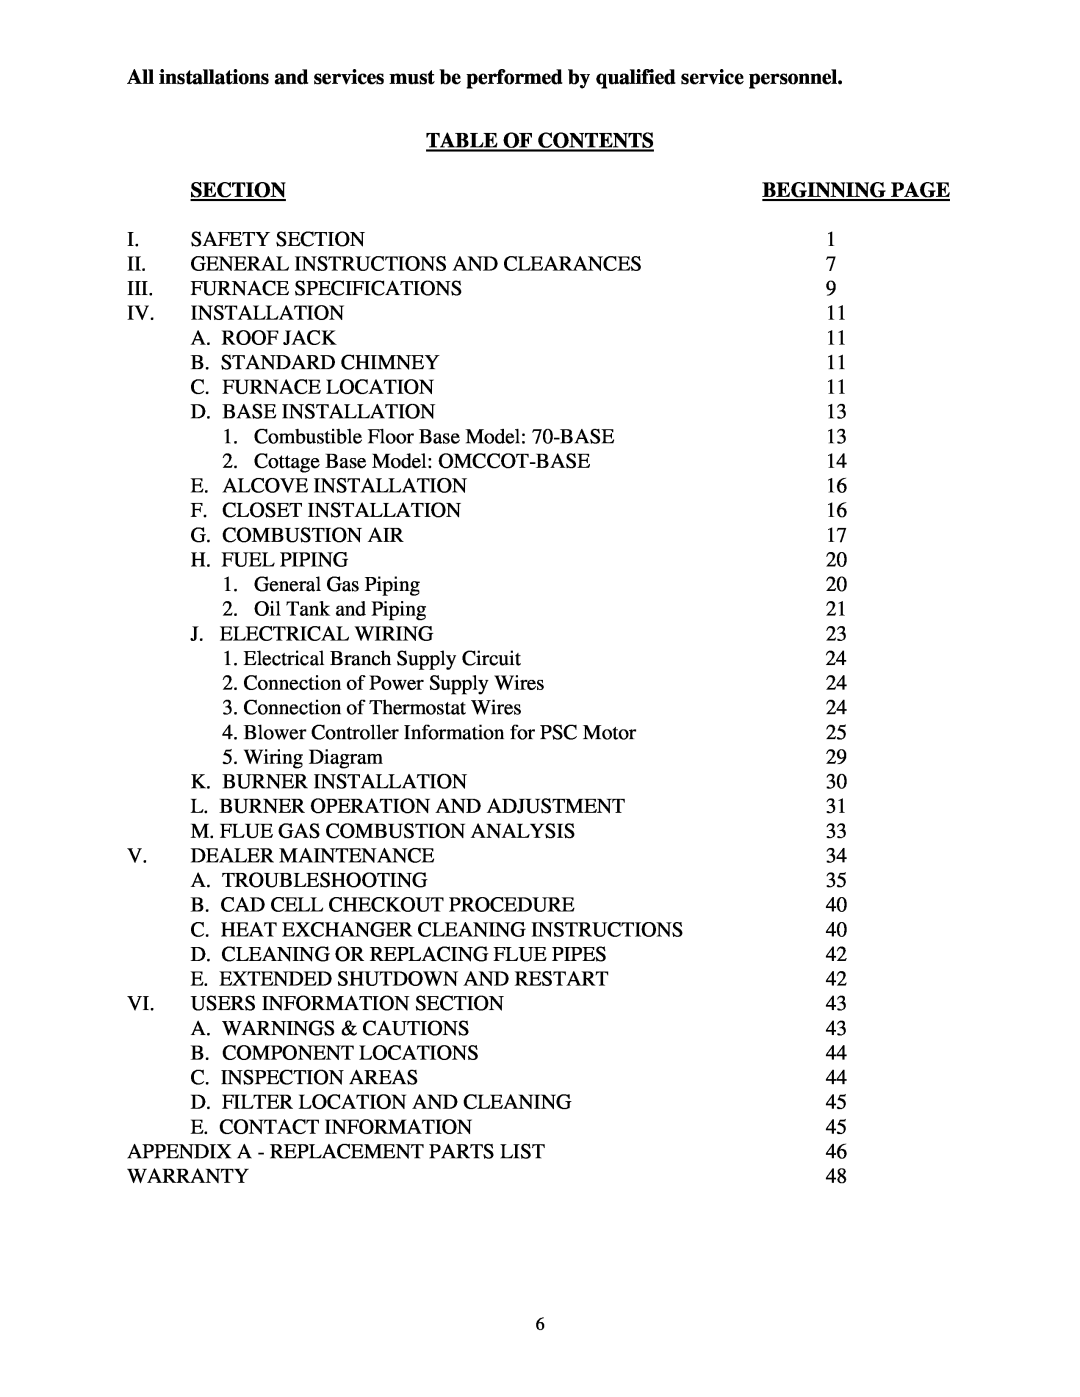 Thermo Products omd-70 service manual Table Of Contents, Section, Beginning Page 